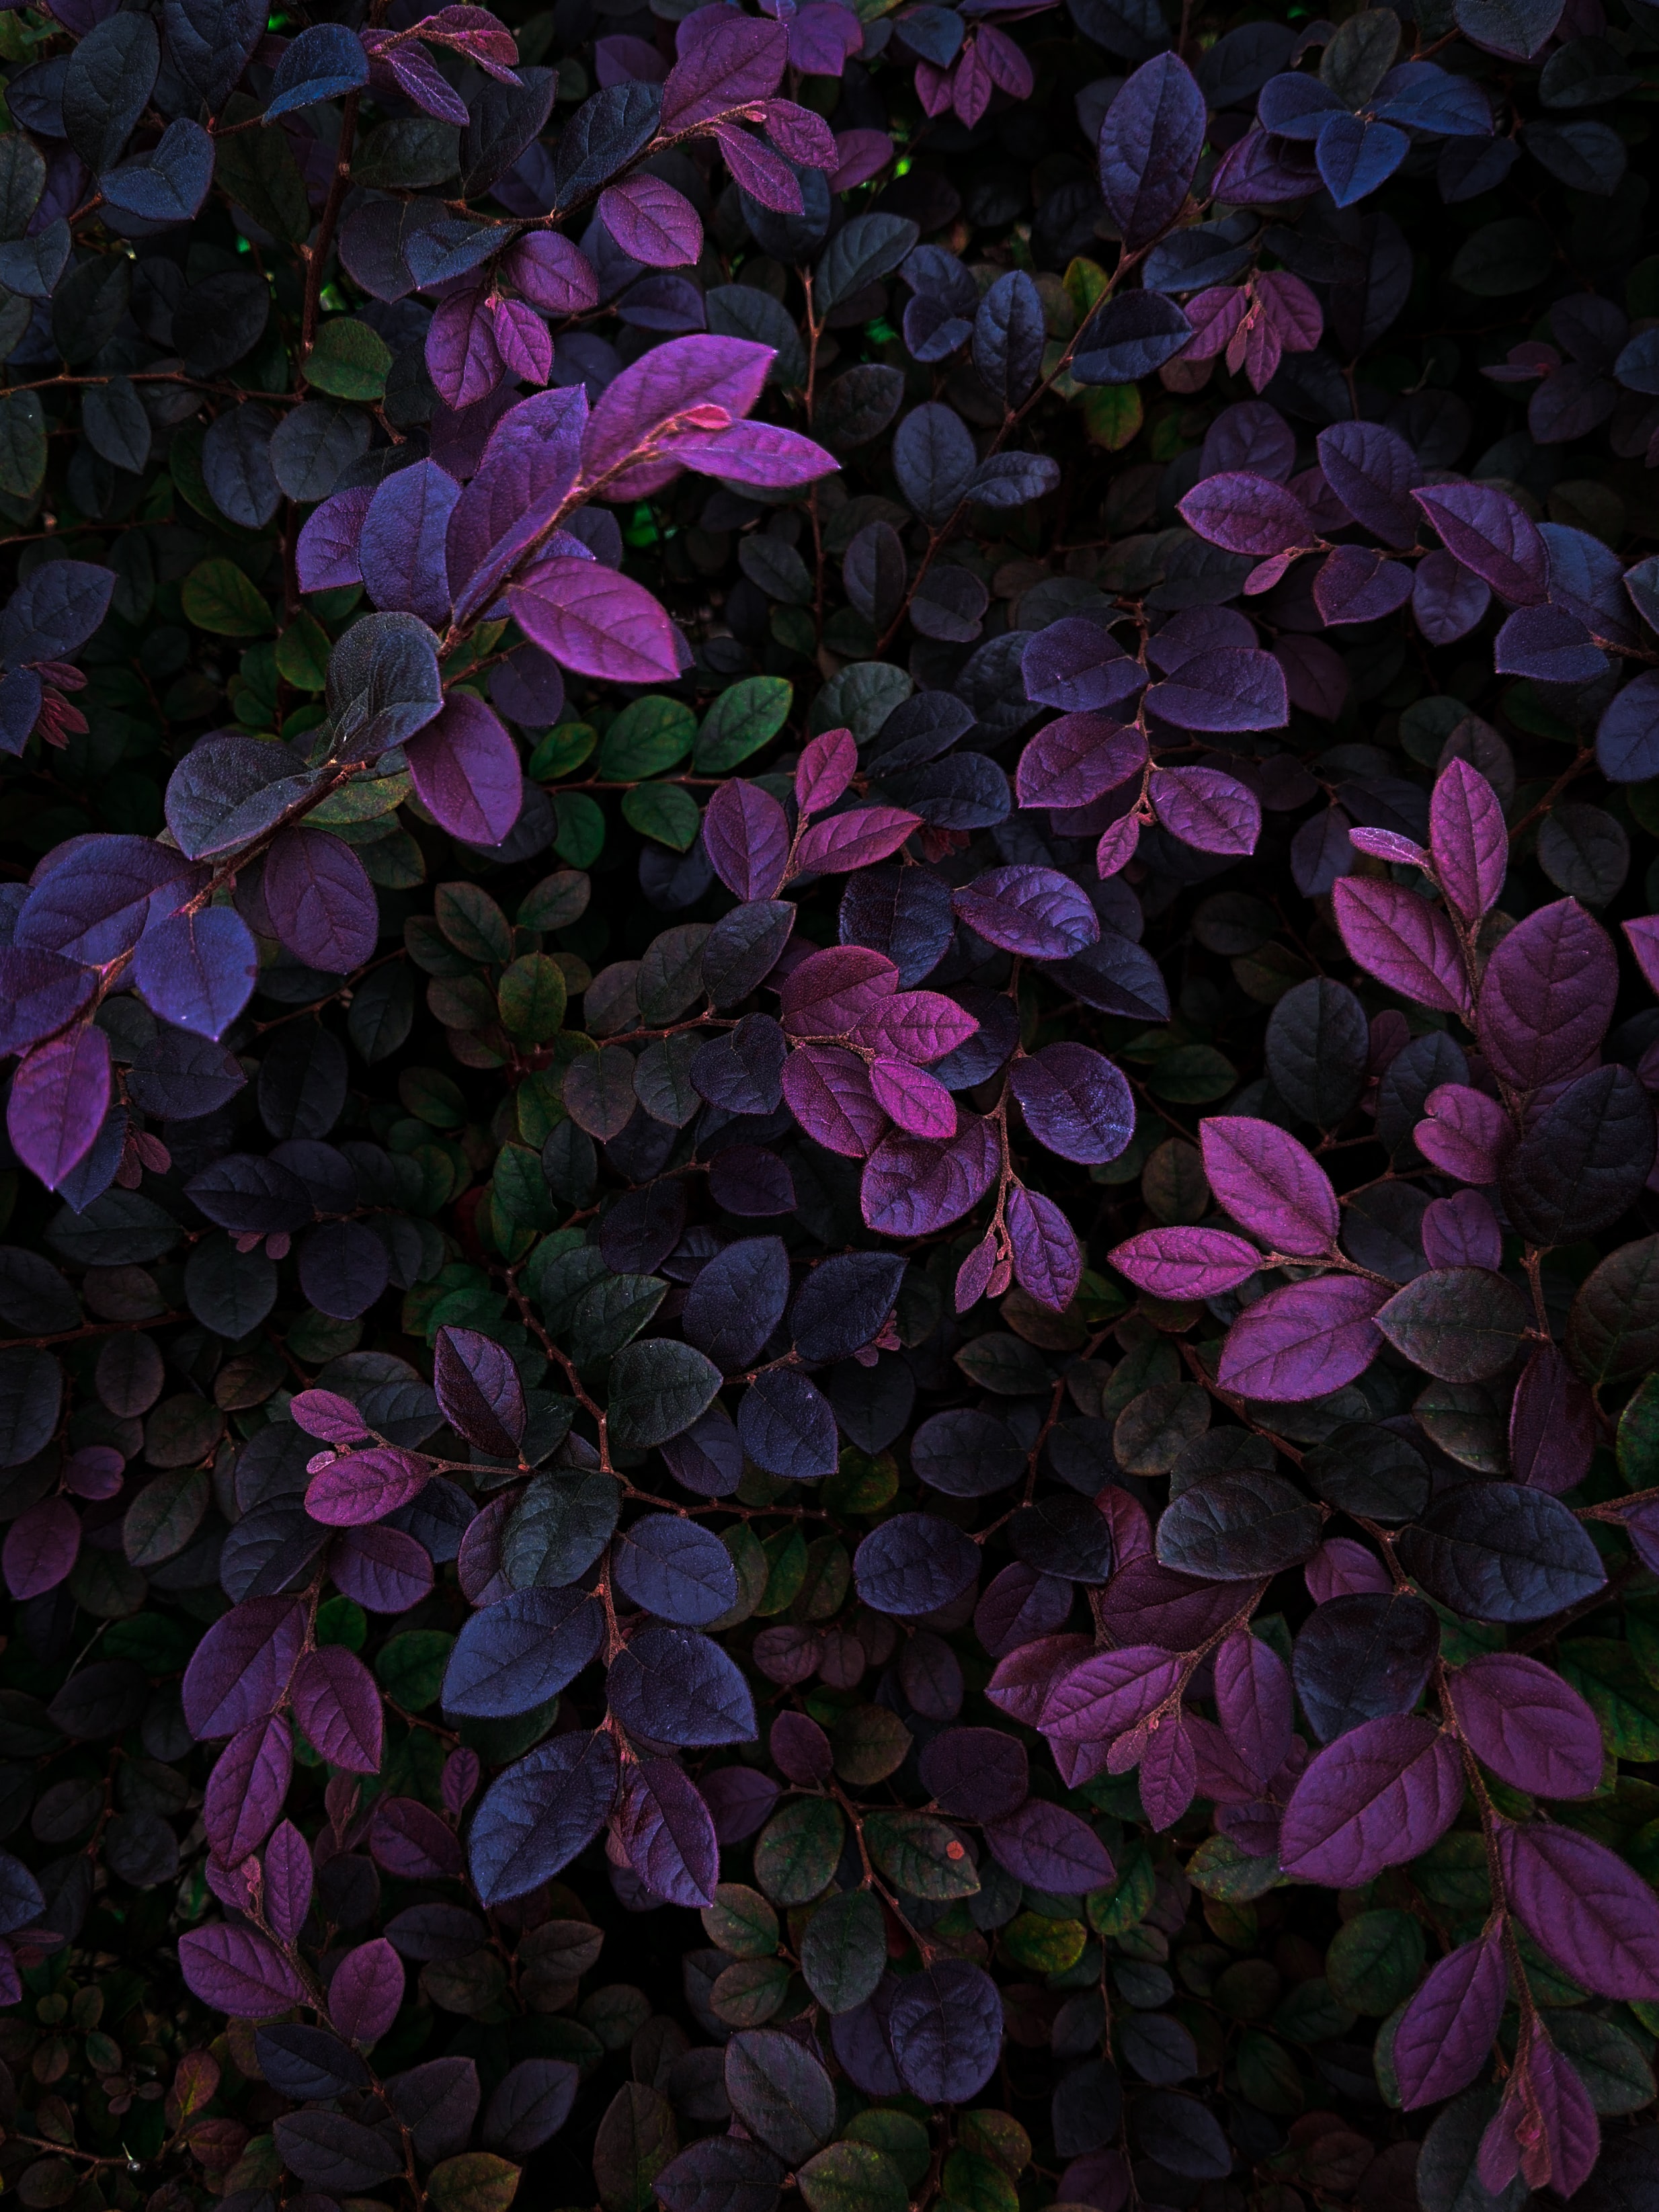 Popular Leaves Image for Phone